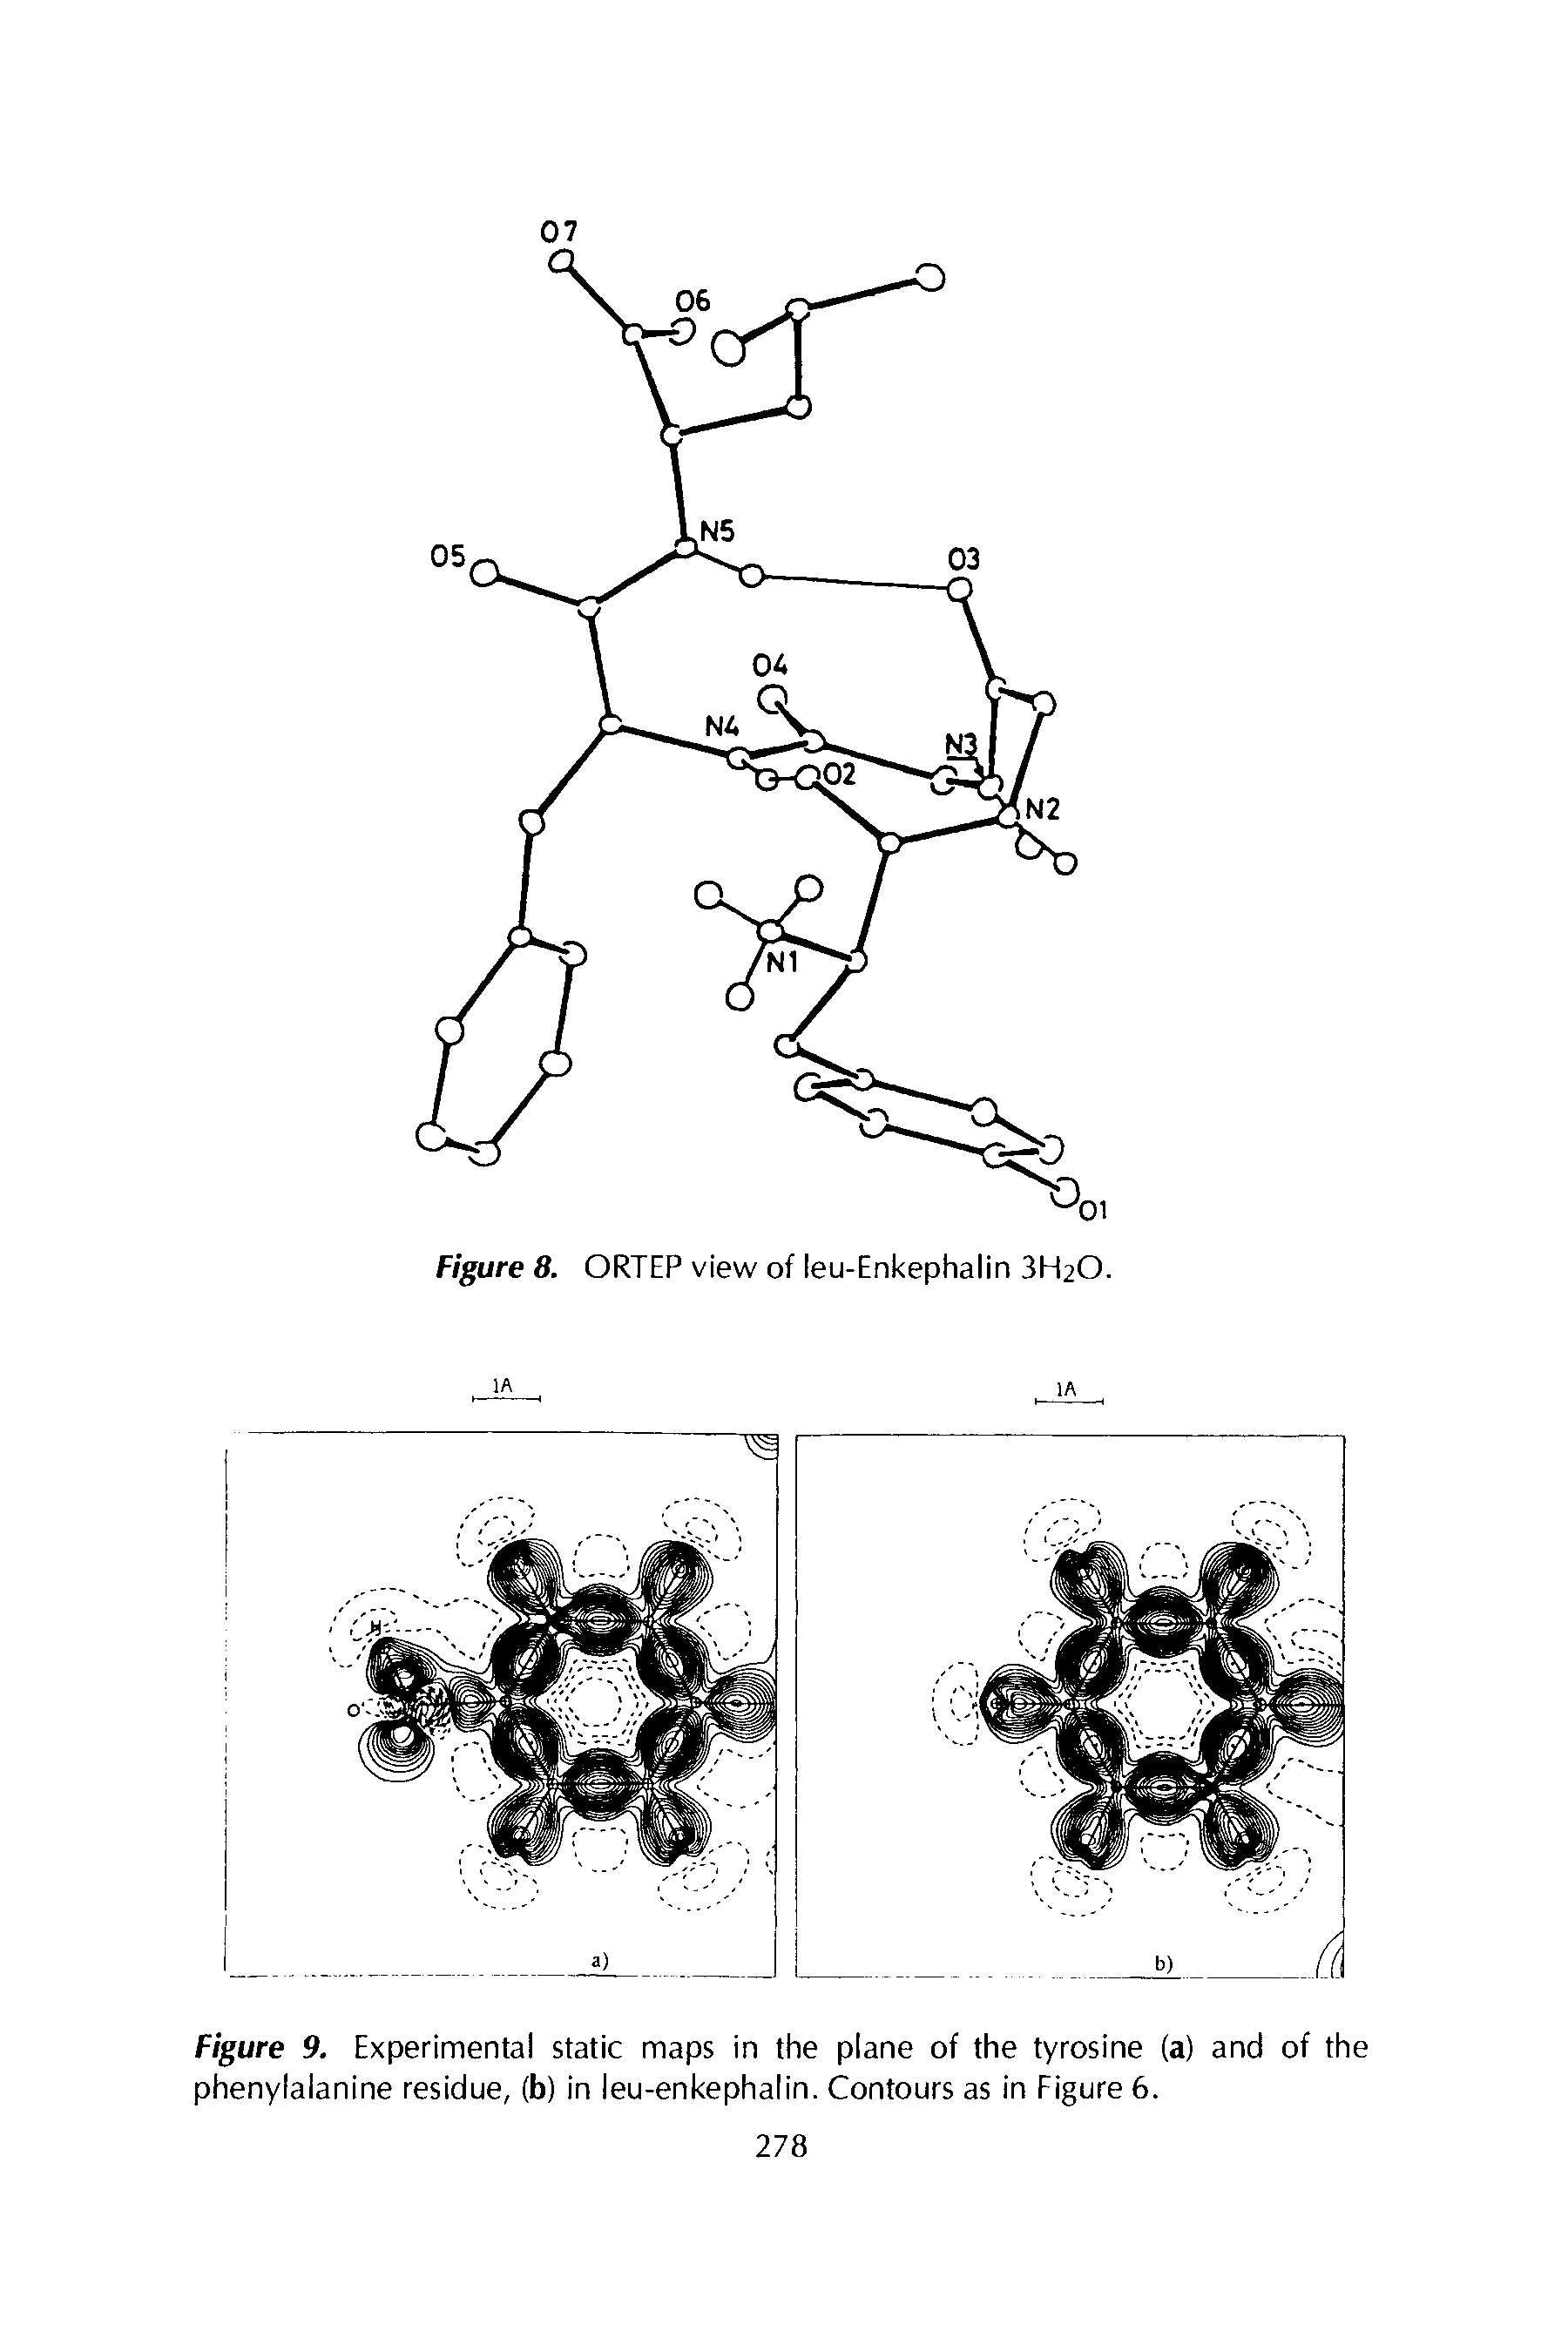 Figure 9. Experimental static maps in the plane of the tyrosine (a) and of the phenylalanine residue, (b) in leu-enkephalin. Contours as in Figure 6.